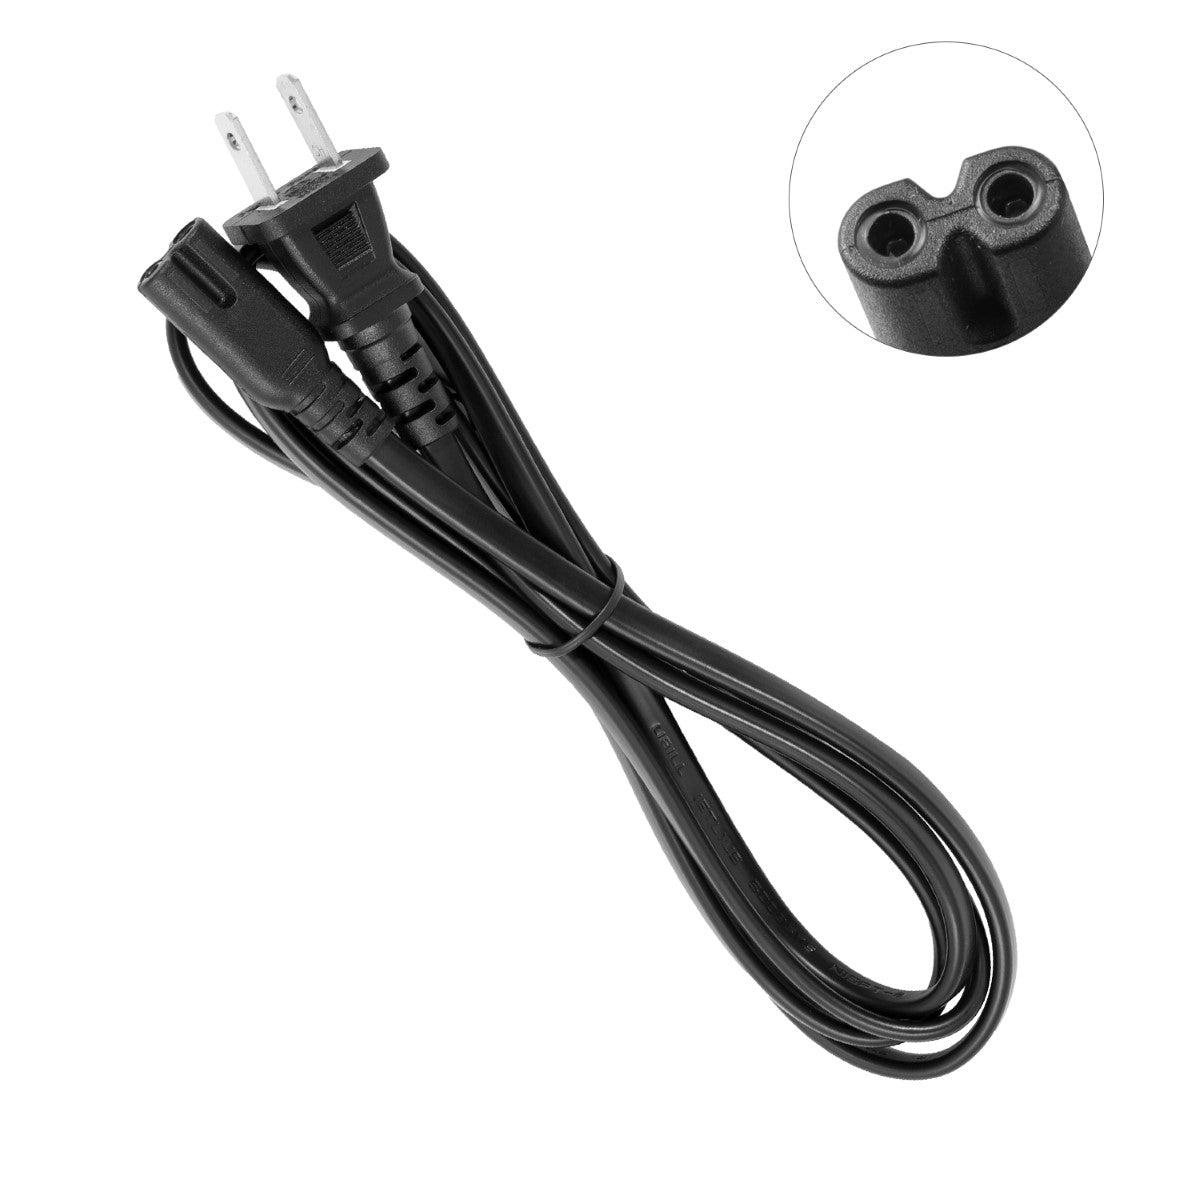 Power Cord for HP ENVY 5660 e-All-in-One Printer.